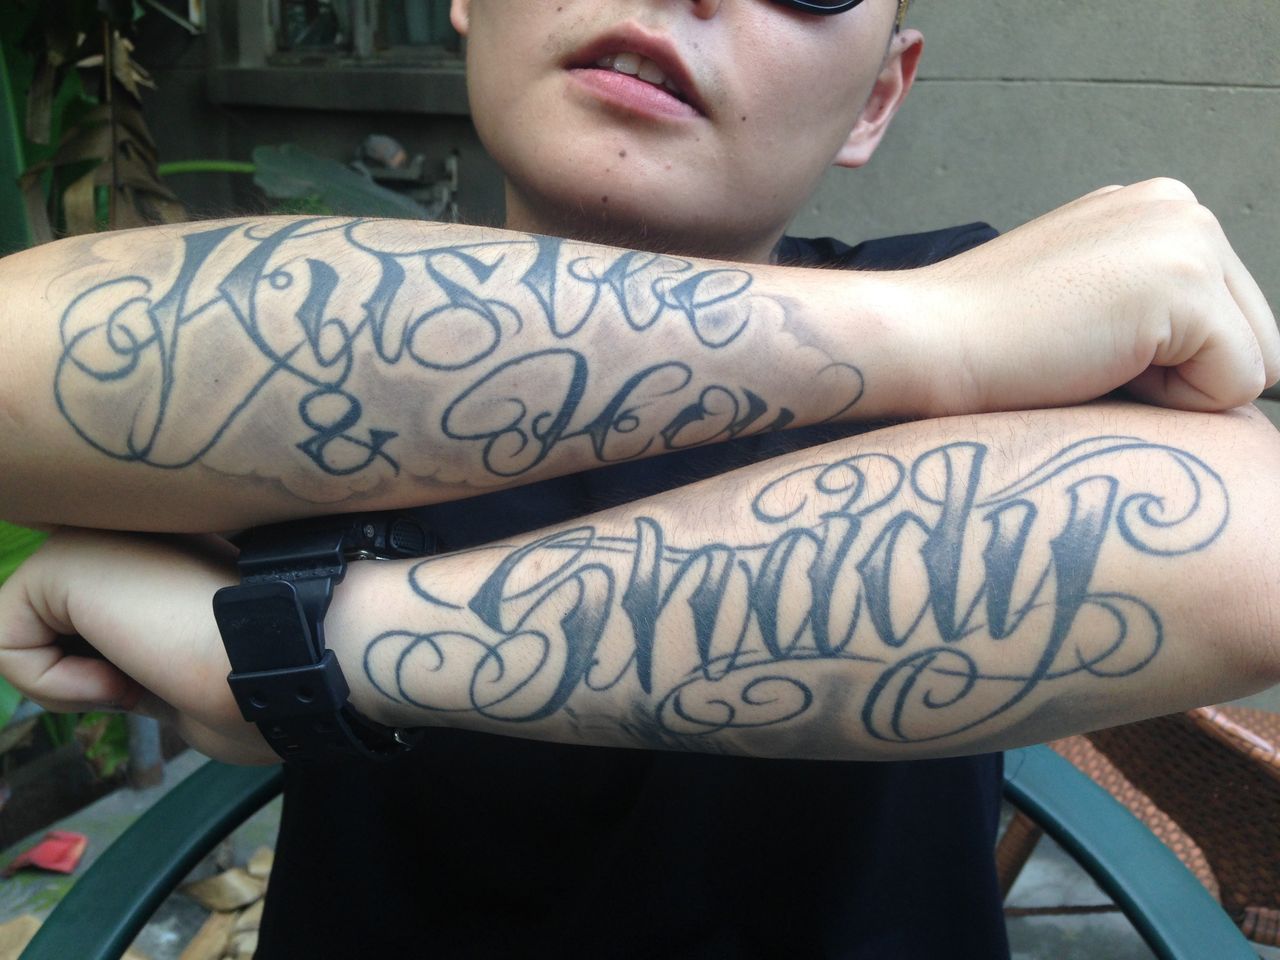 <p>English-language tattoos on Fat Shady's arms read "Hustle & Flow" and "Shady."</p>